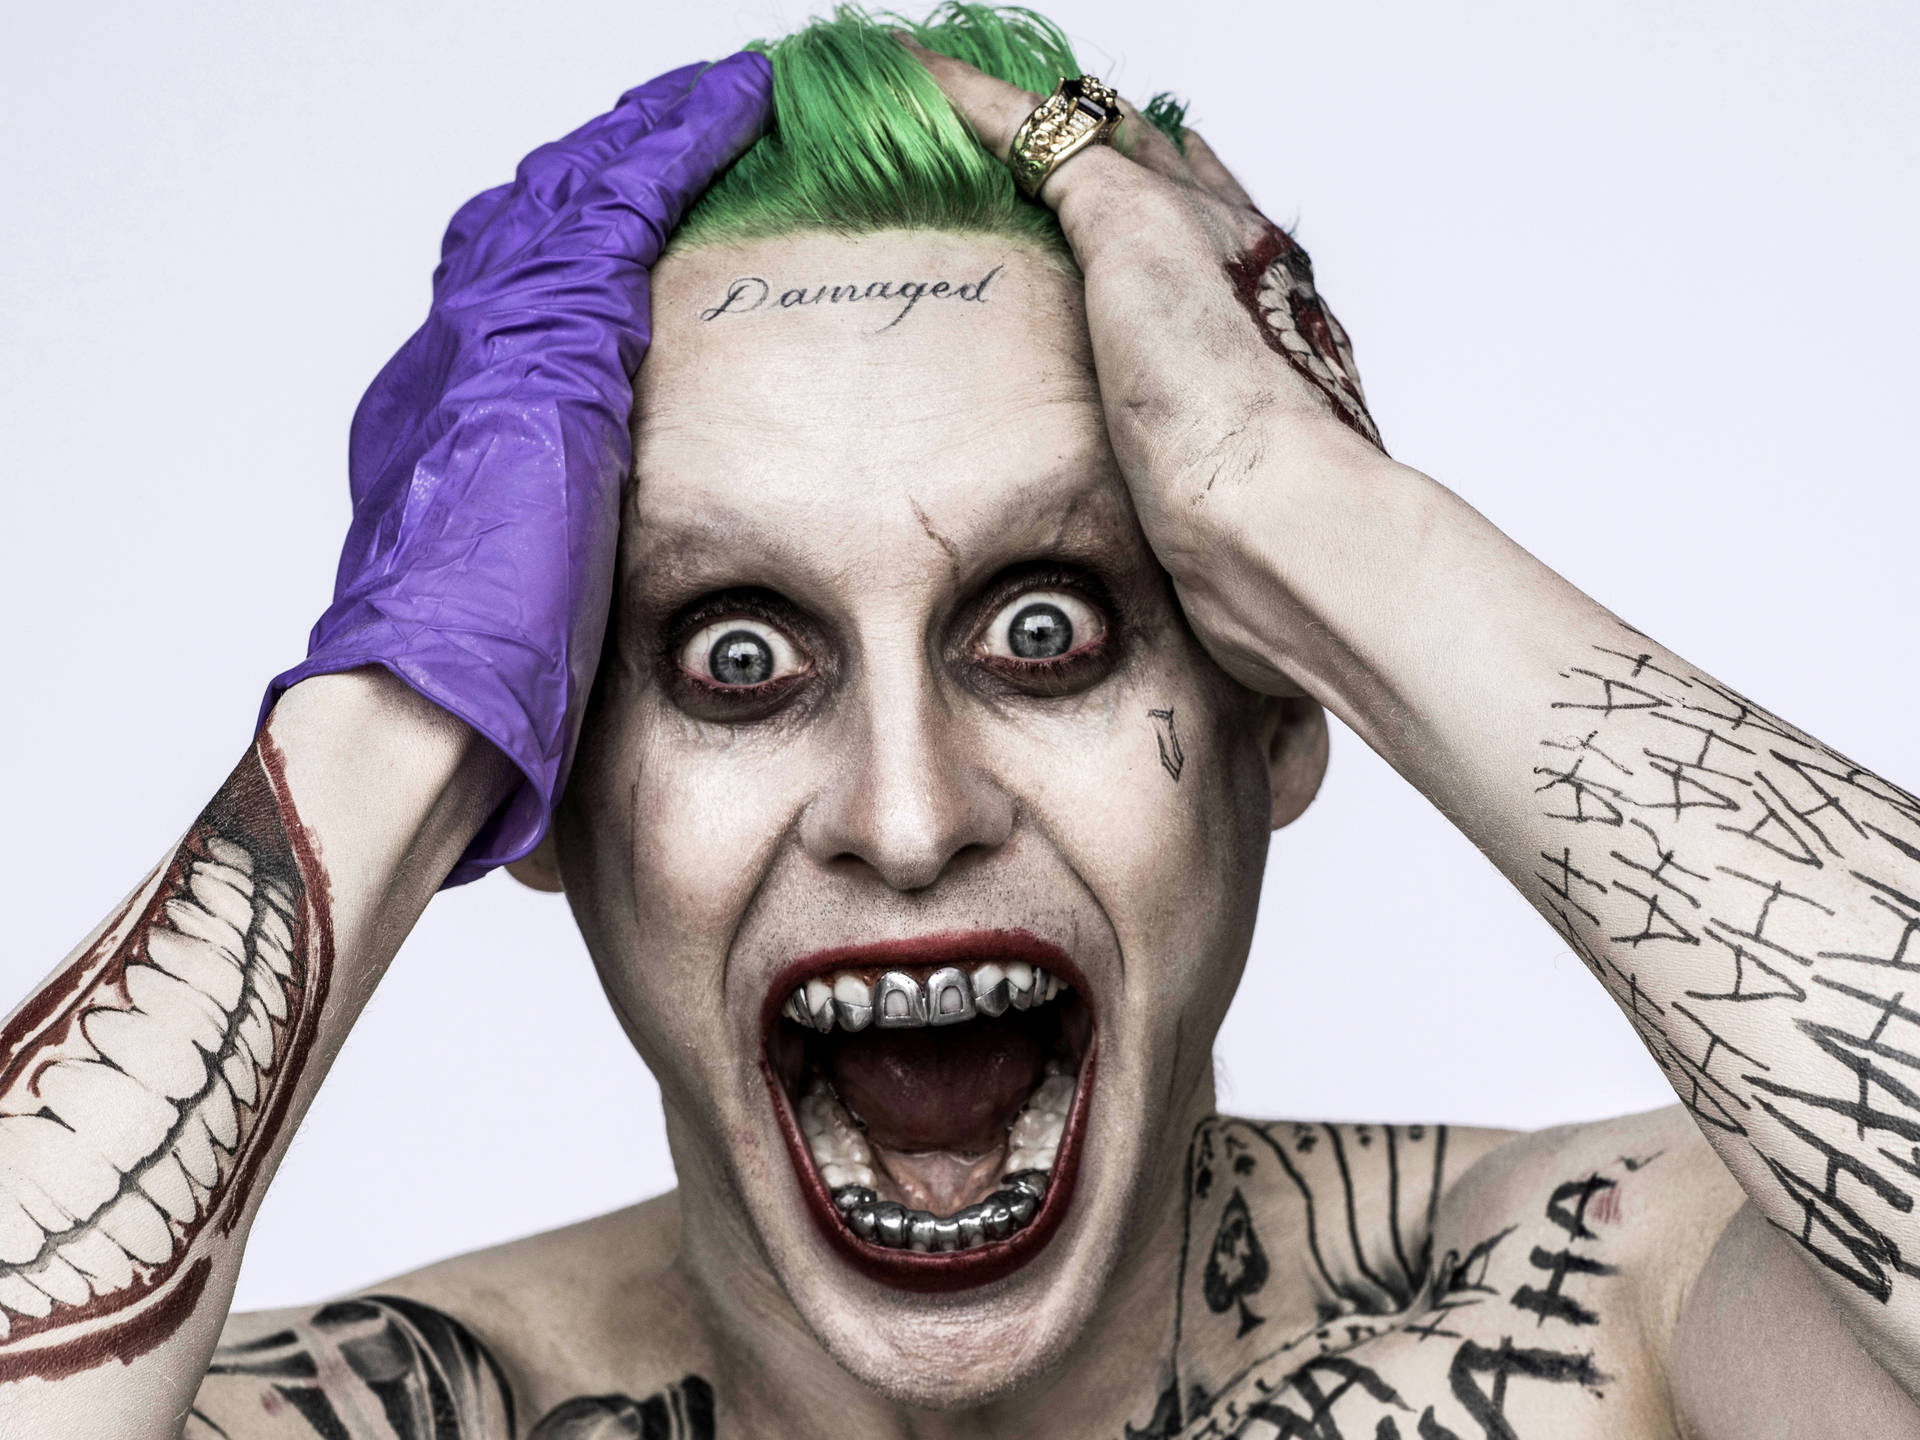 The Crazed Joker in the Suicide Squad Wallpaper